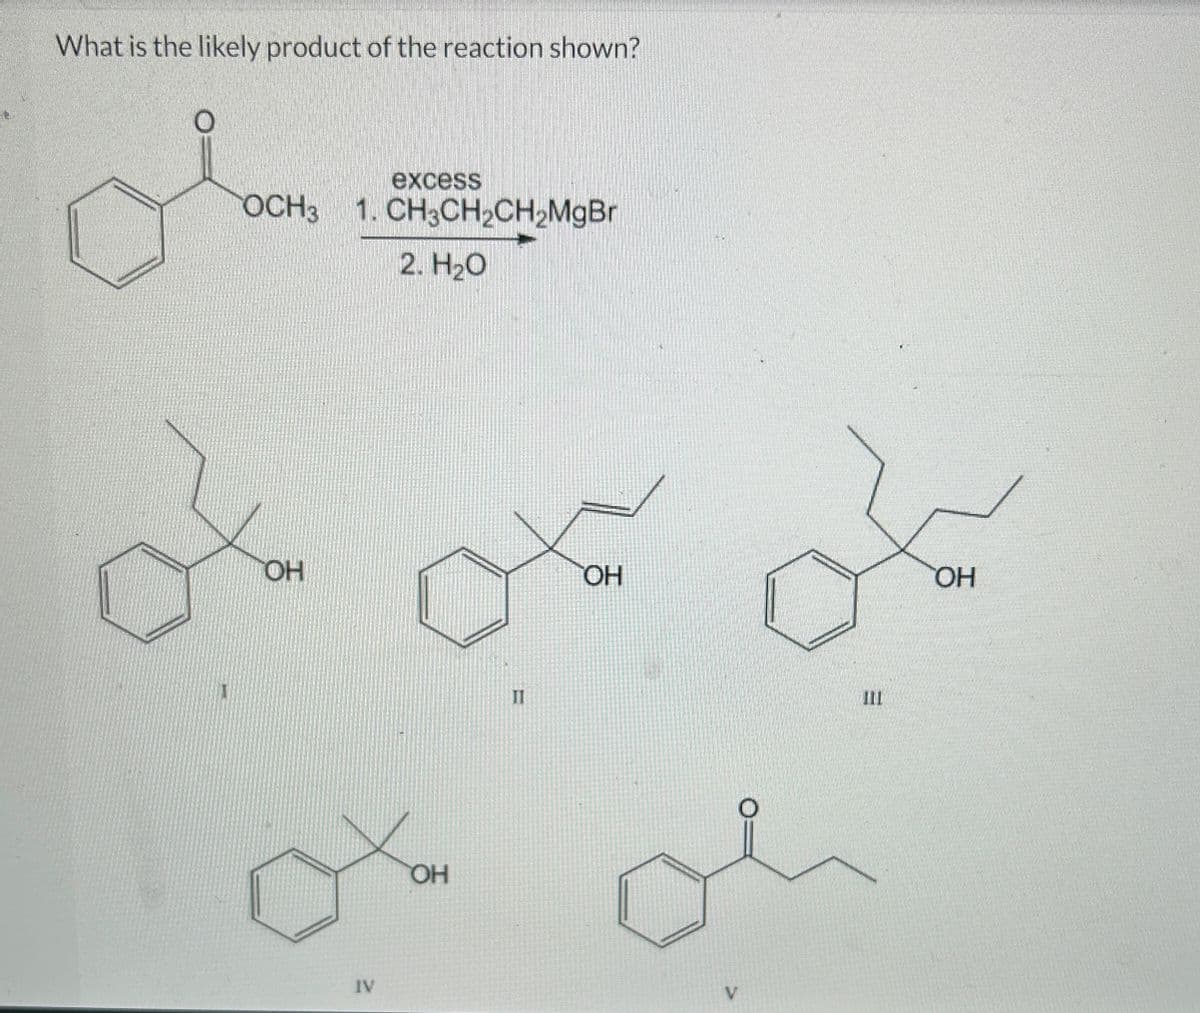 What is the likely product of the reaction shown?
OCH3 1. CH3CH2CH2MgBr
2. H2O
OH
excess
IV
장
OH
II
OH
V
트
OH